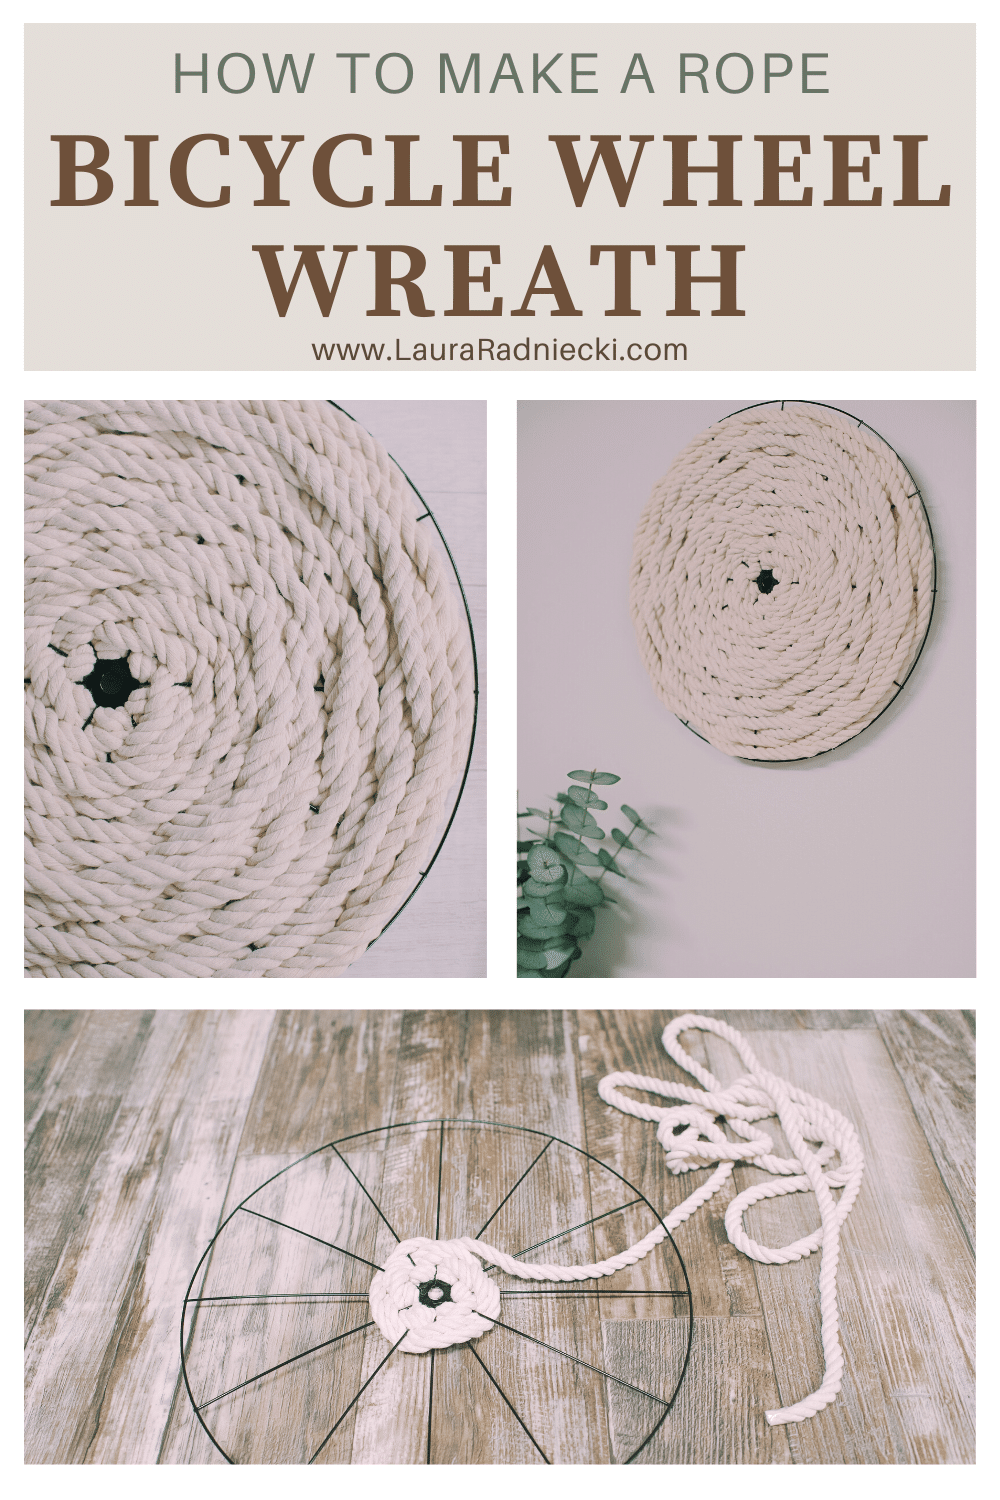 How to make a rope bicycle wheel wreath using cotton rope from the Dollar Tree.